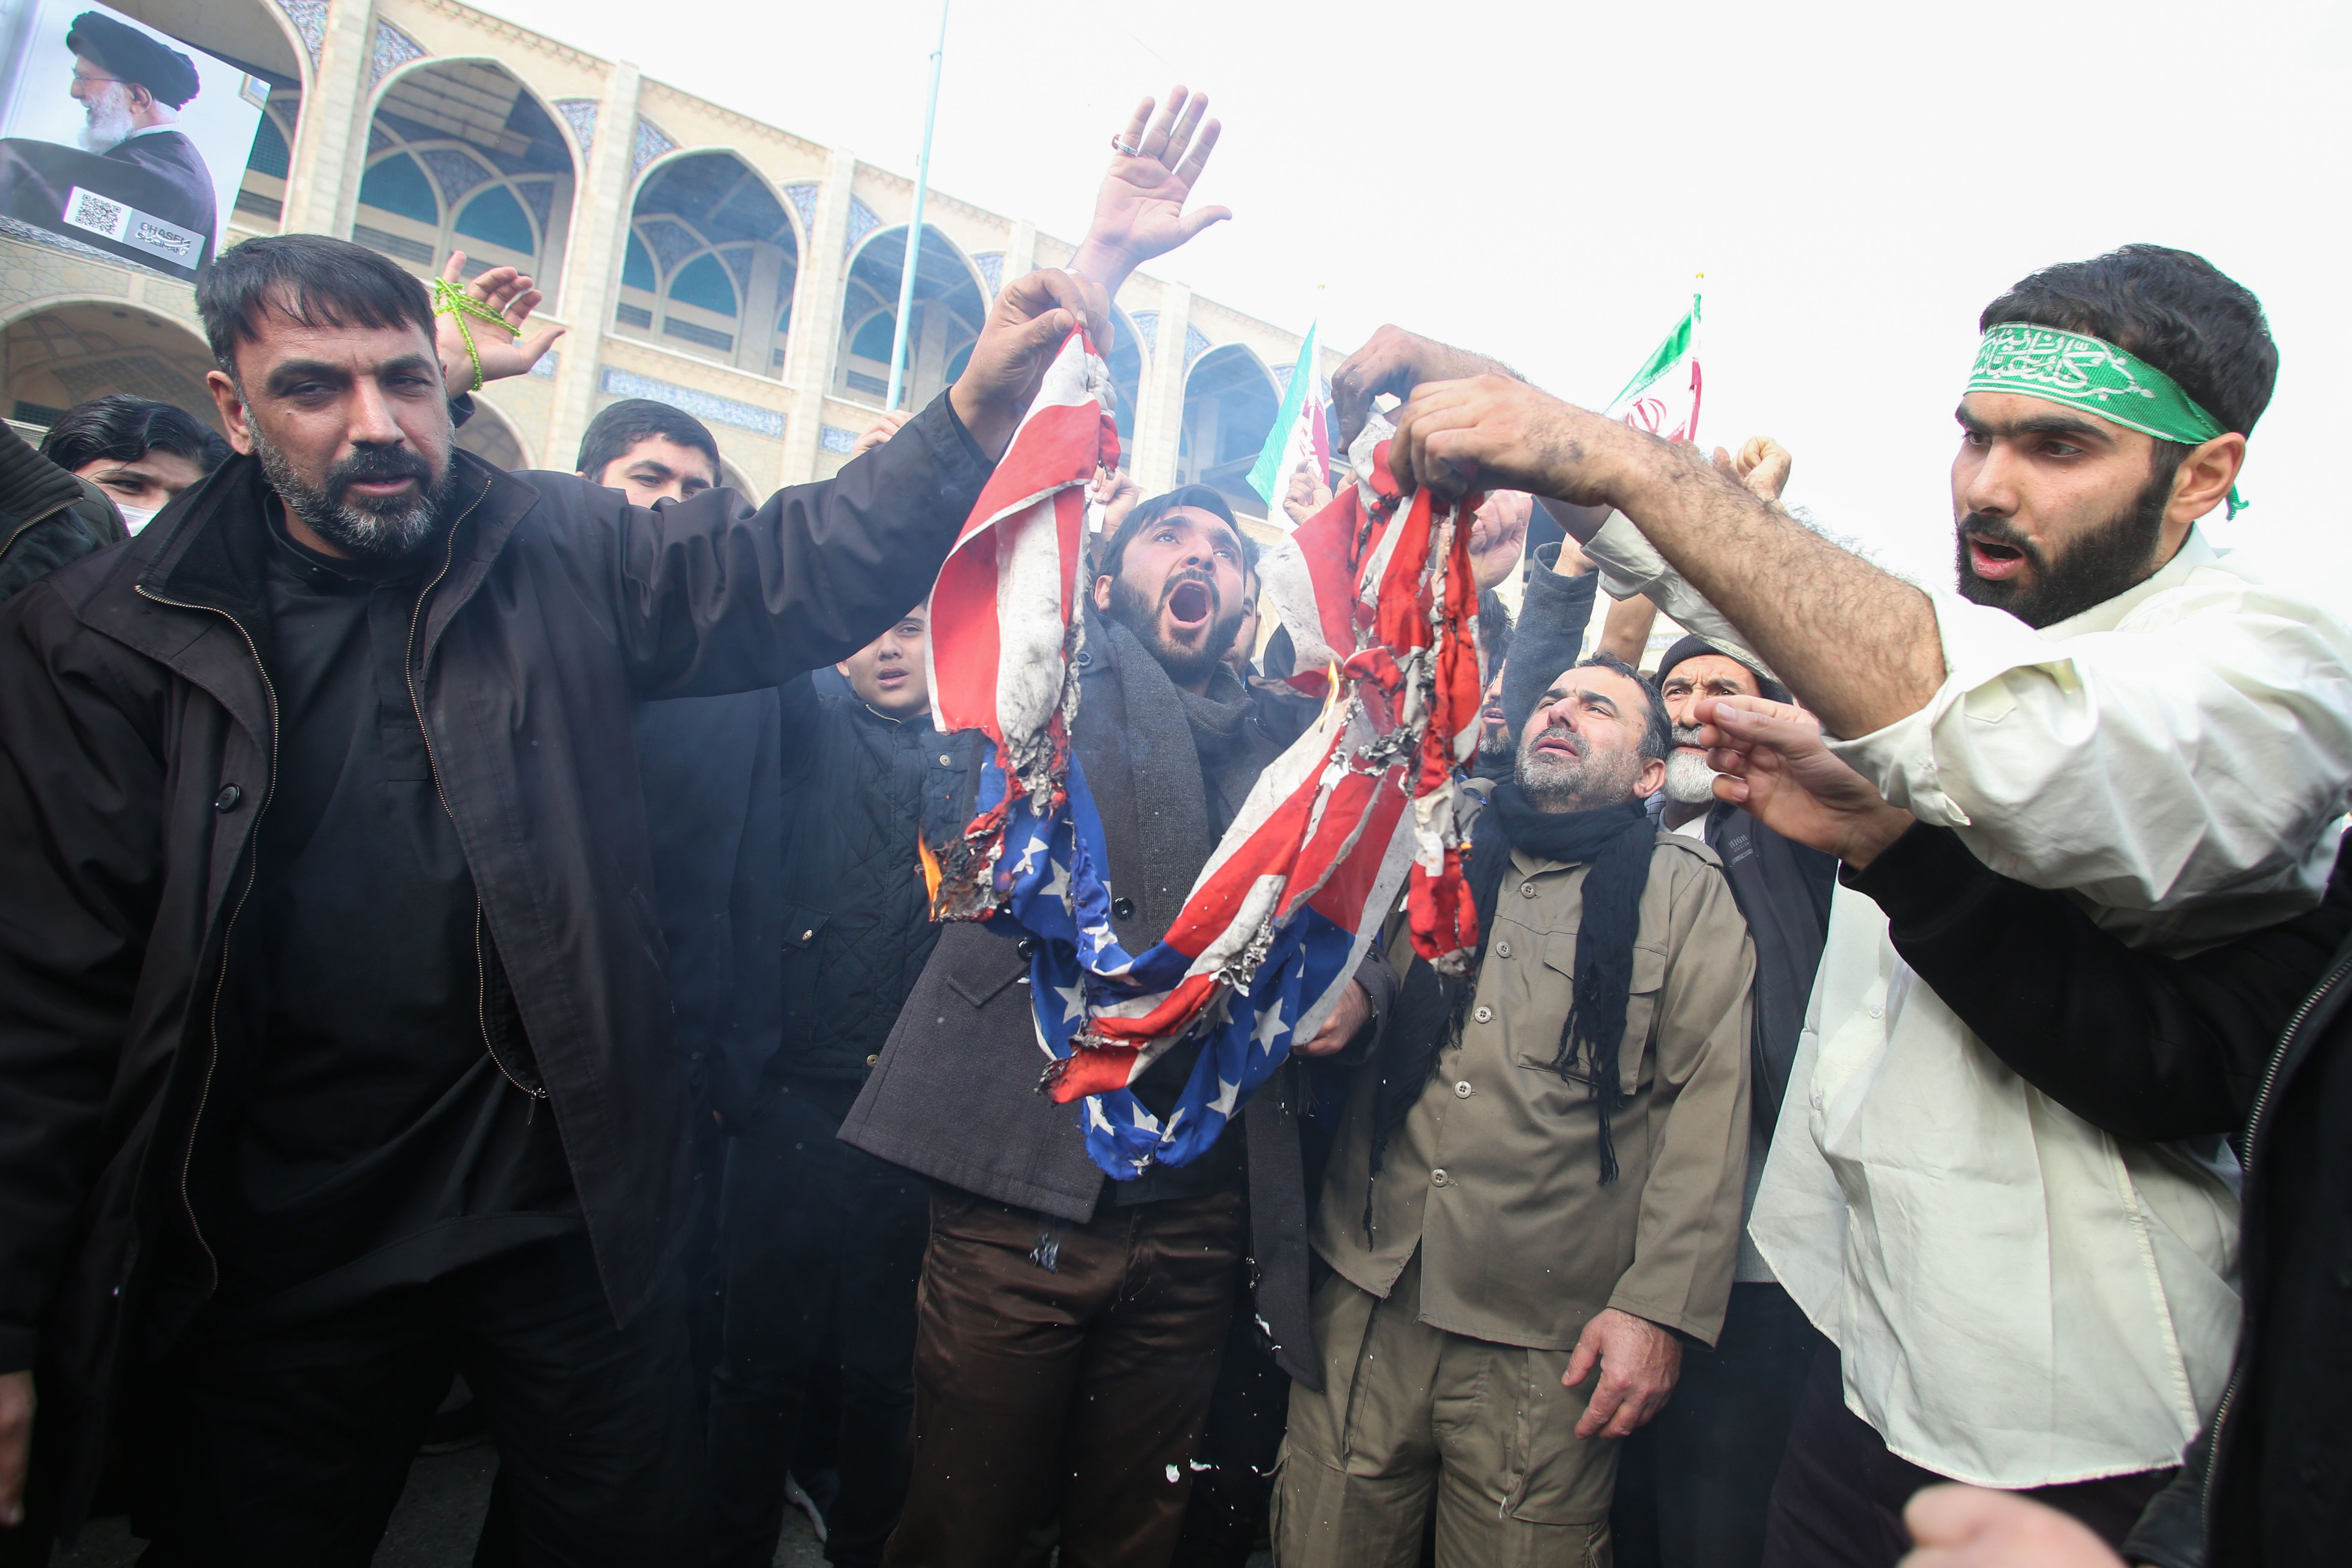 Iranians burn a U.S. flag during a demonstration against American "crimes" in Tehran on January 3, 2020 following the killing of Iranian Revolutionary Guards Major General Qasem Soleimani in a US strike on his convoy at Baghdad international airport. (Photo: Atta Kenare/AFP via Getty Images)